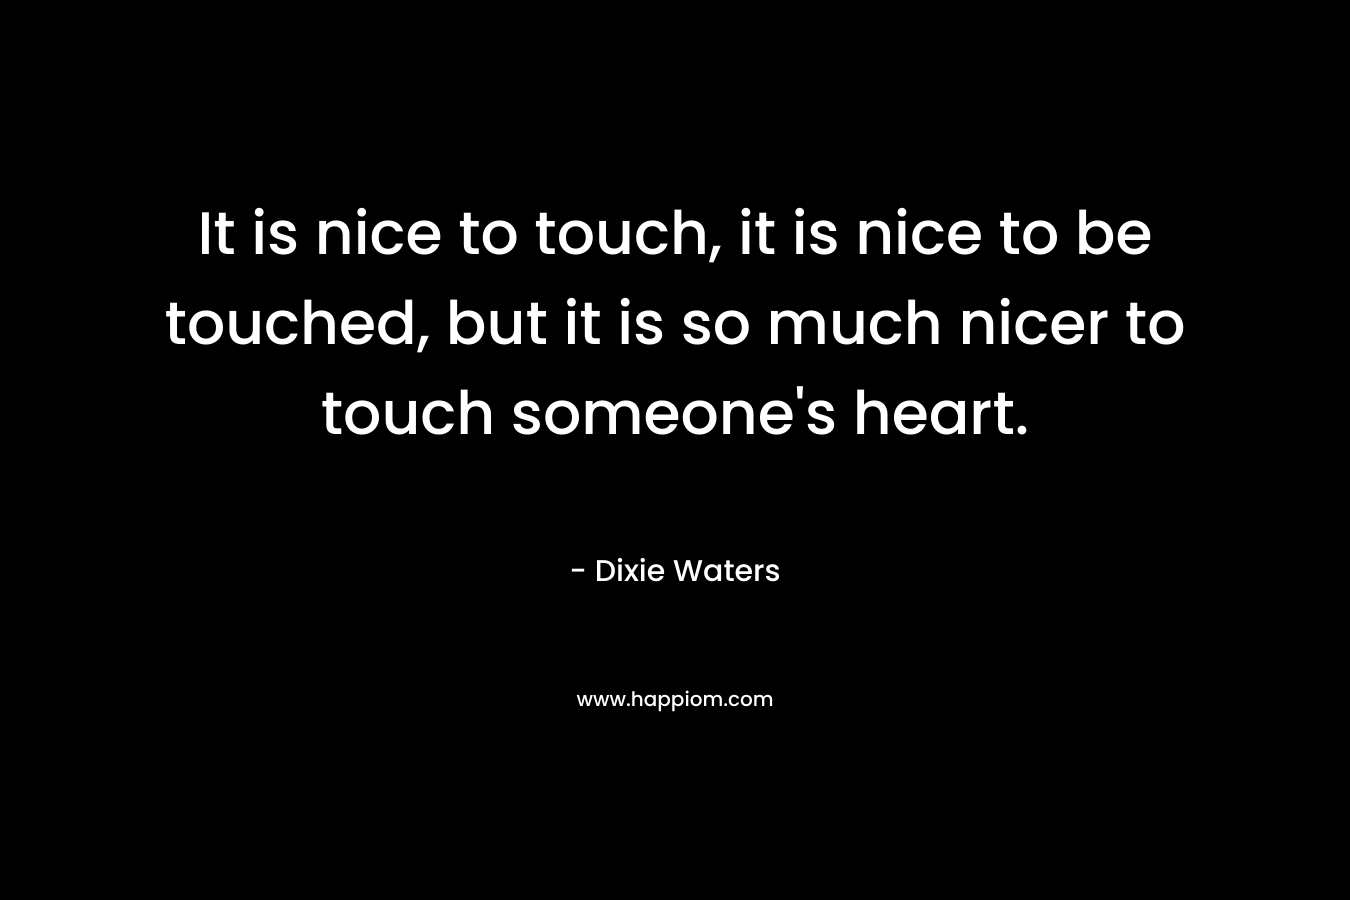 It is nice to touch, it is nice to be touched, but it is so much nicer to touch someone's heart.